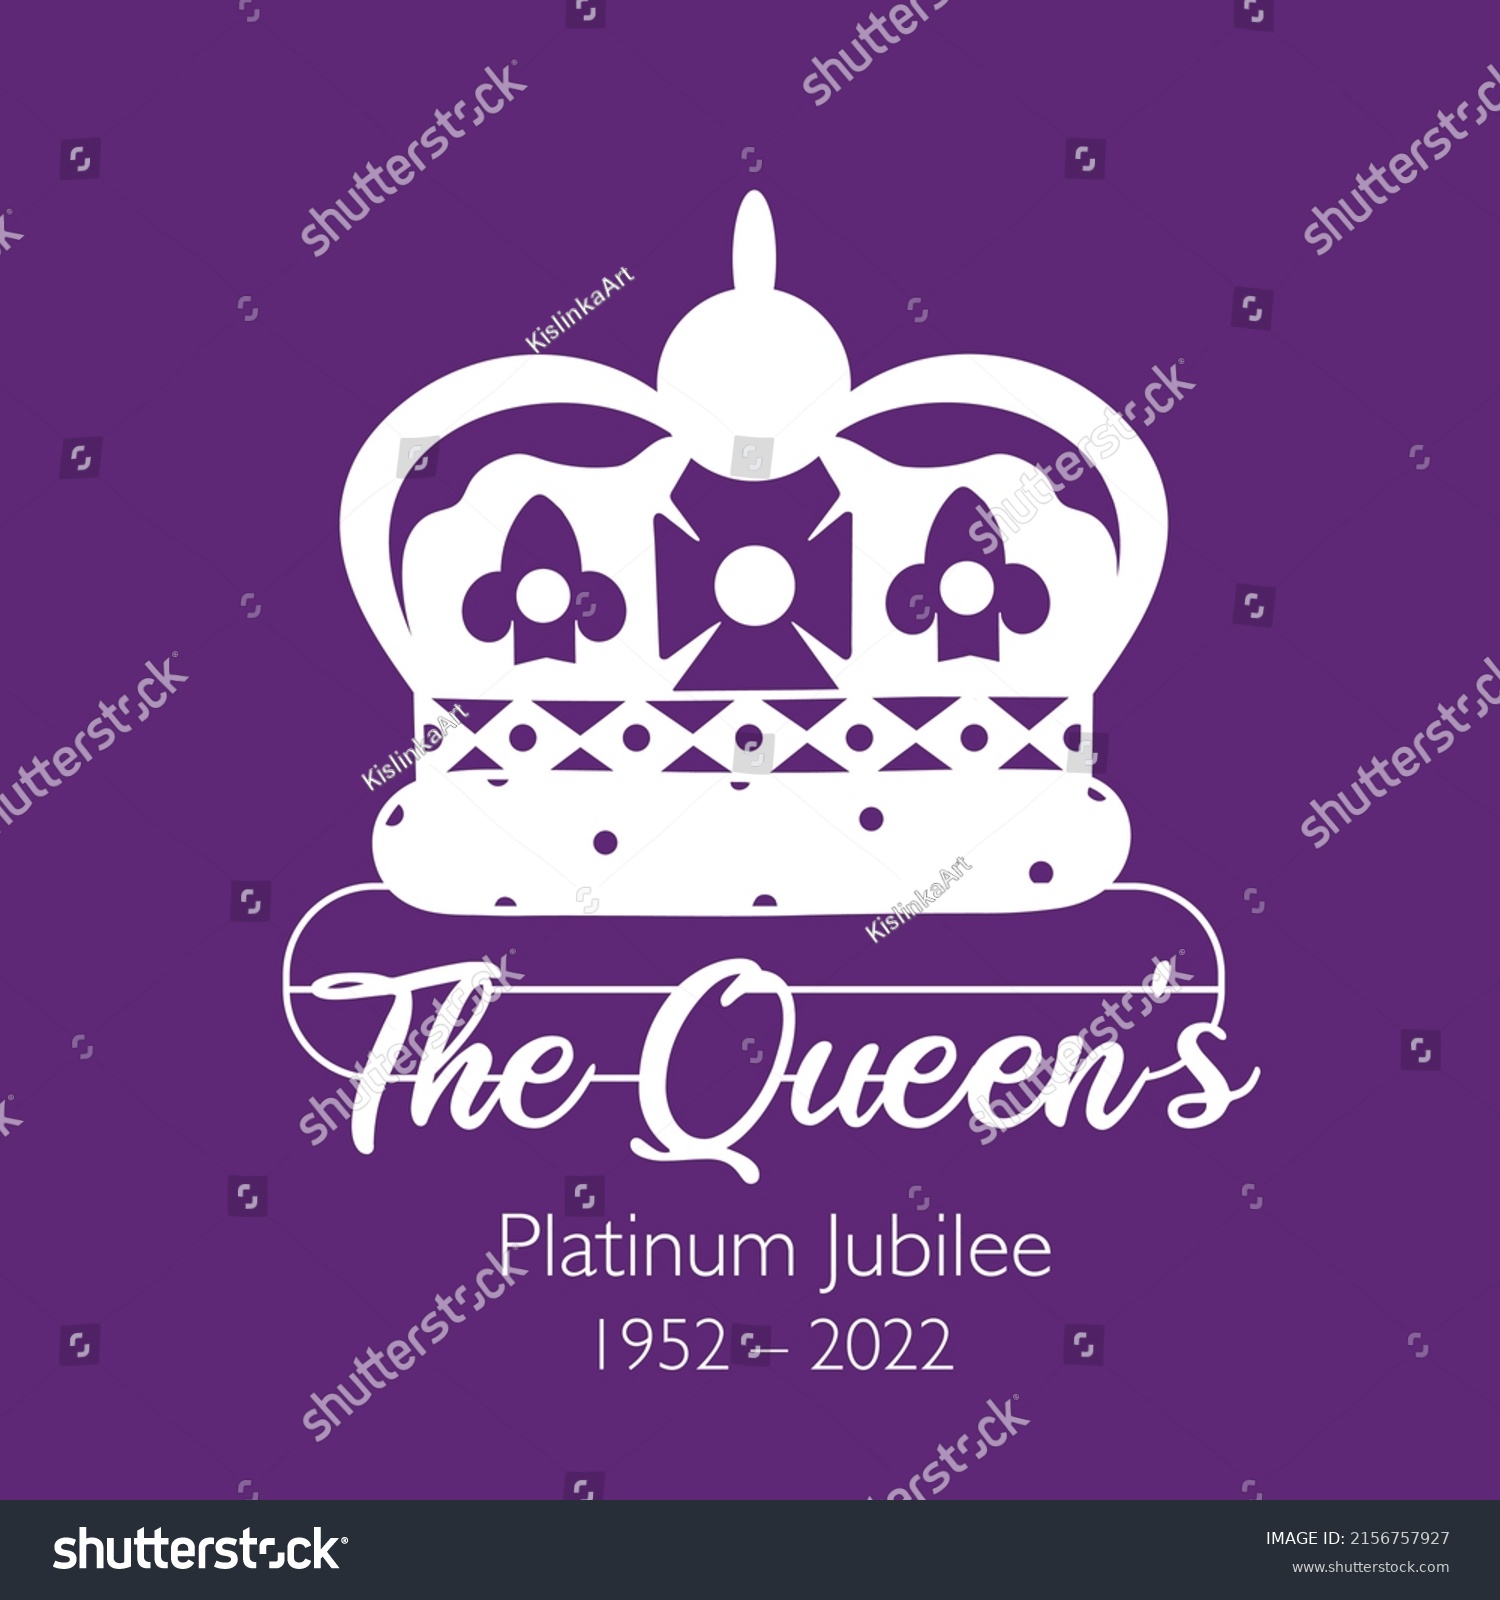 SVG of The Queen's Platinum Jubilee celebration banner Queen Elizabeth’s crown coronation 70 years. Ideal design for banners, flayers, social media, stickers, greeting cards.  svg